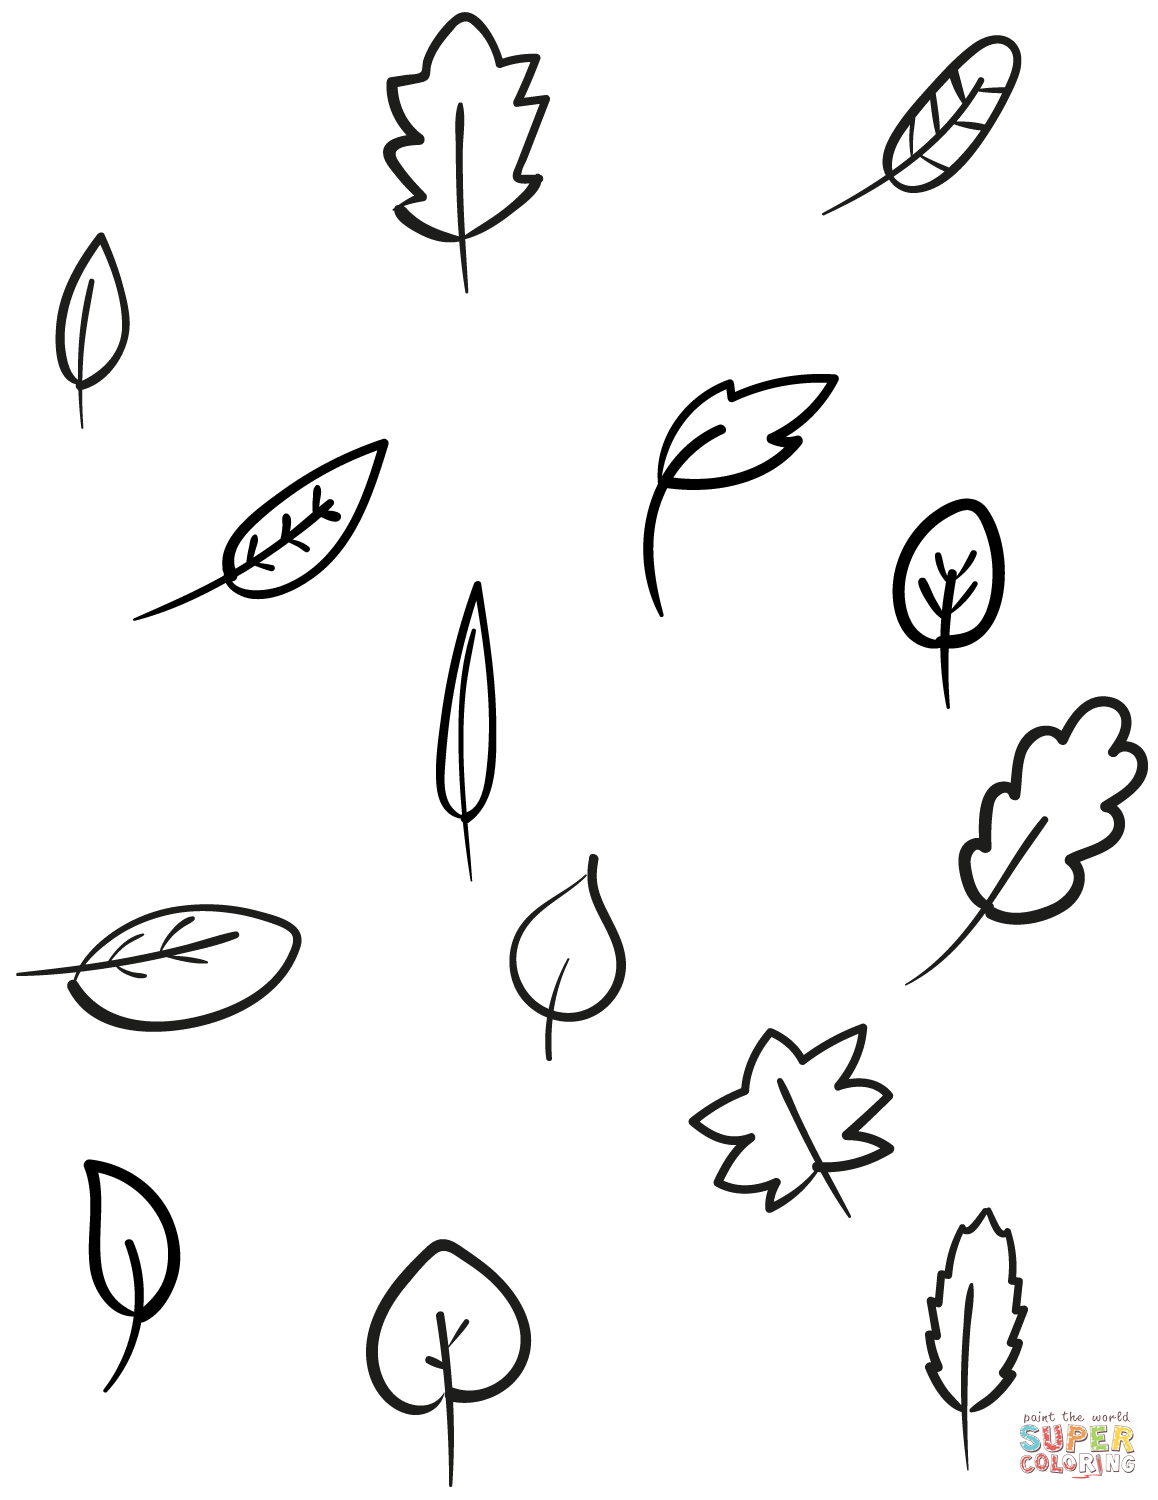 Leaves coloring page free printable coloring pages